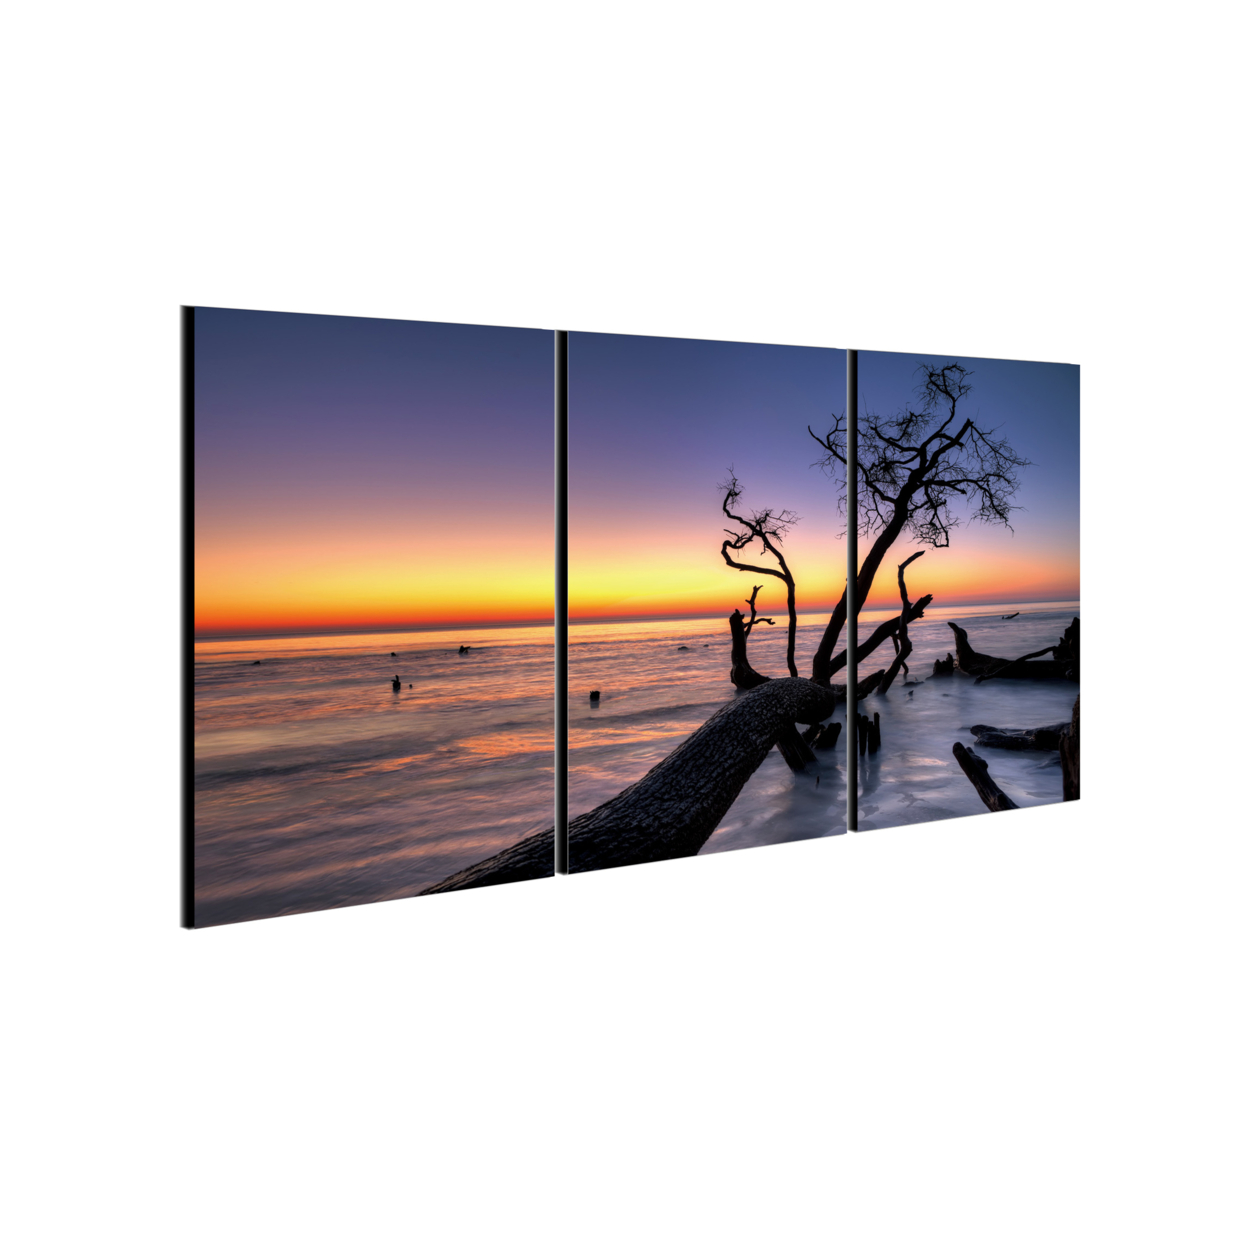 Hawaii Sunset 3 Piece Wrapped Canvas Wall Art Print 20x40.5 Inches